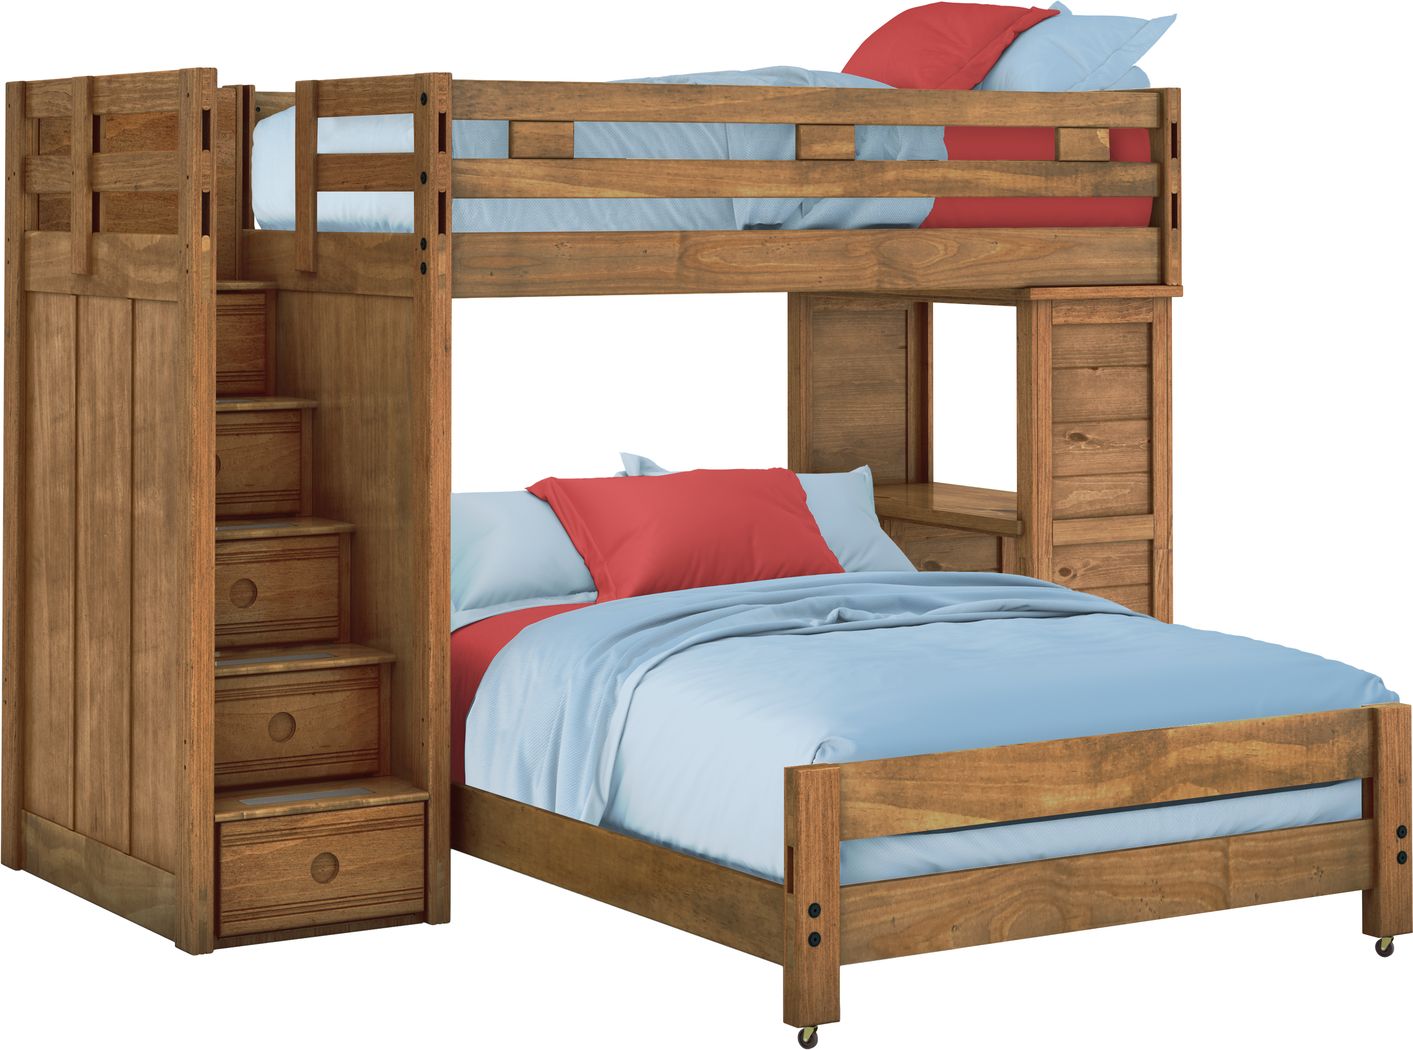 Bunk Beds With Steps Or Stairs, Wooden Bunk Bed With Stairs And Desk